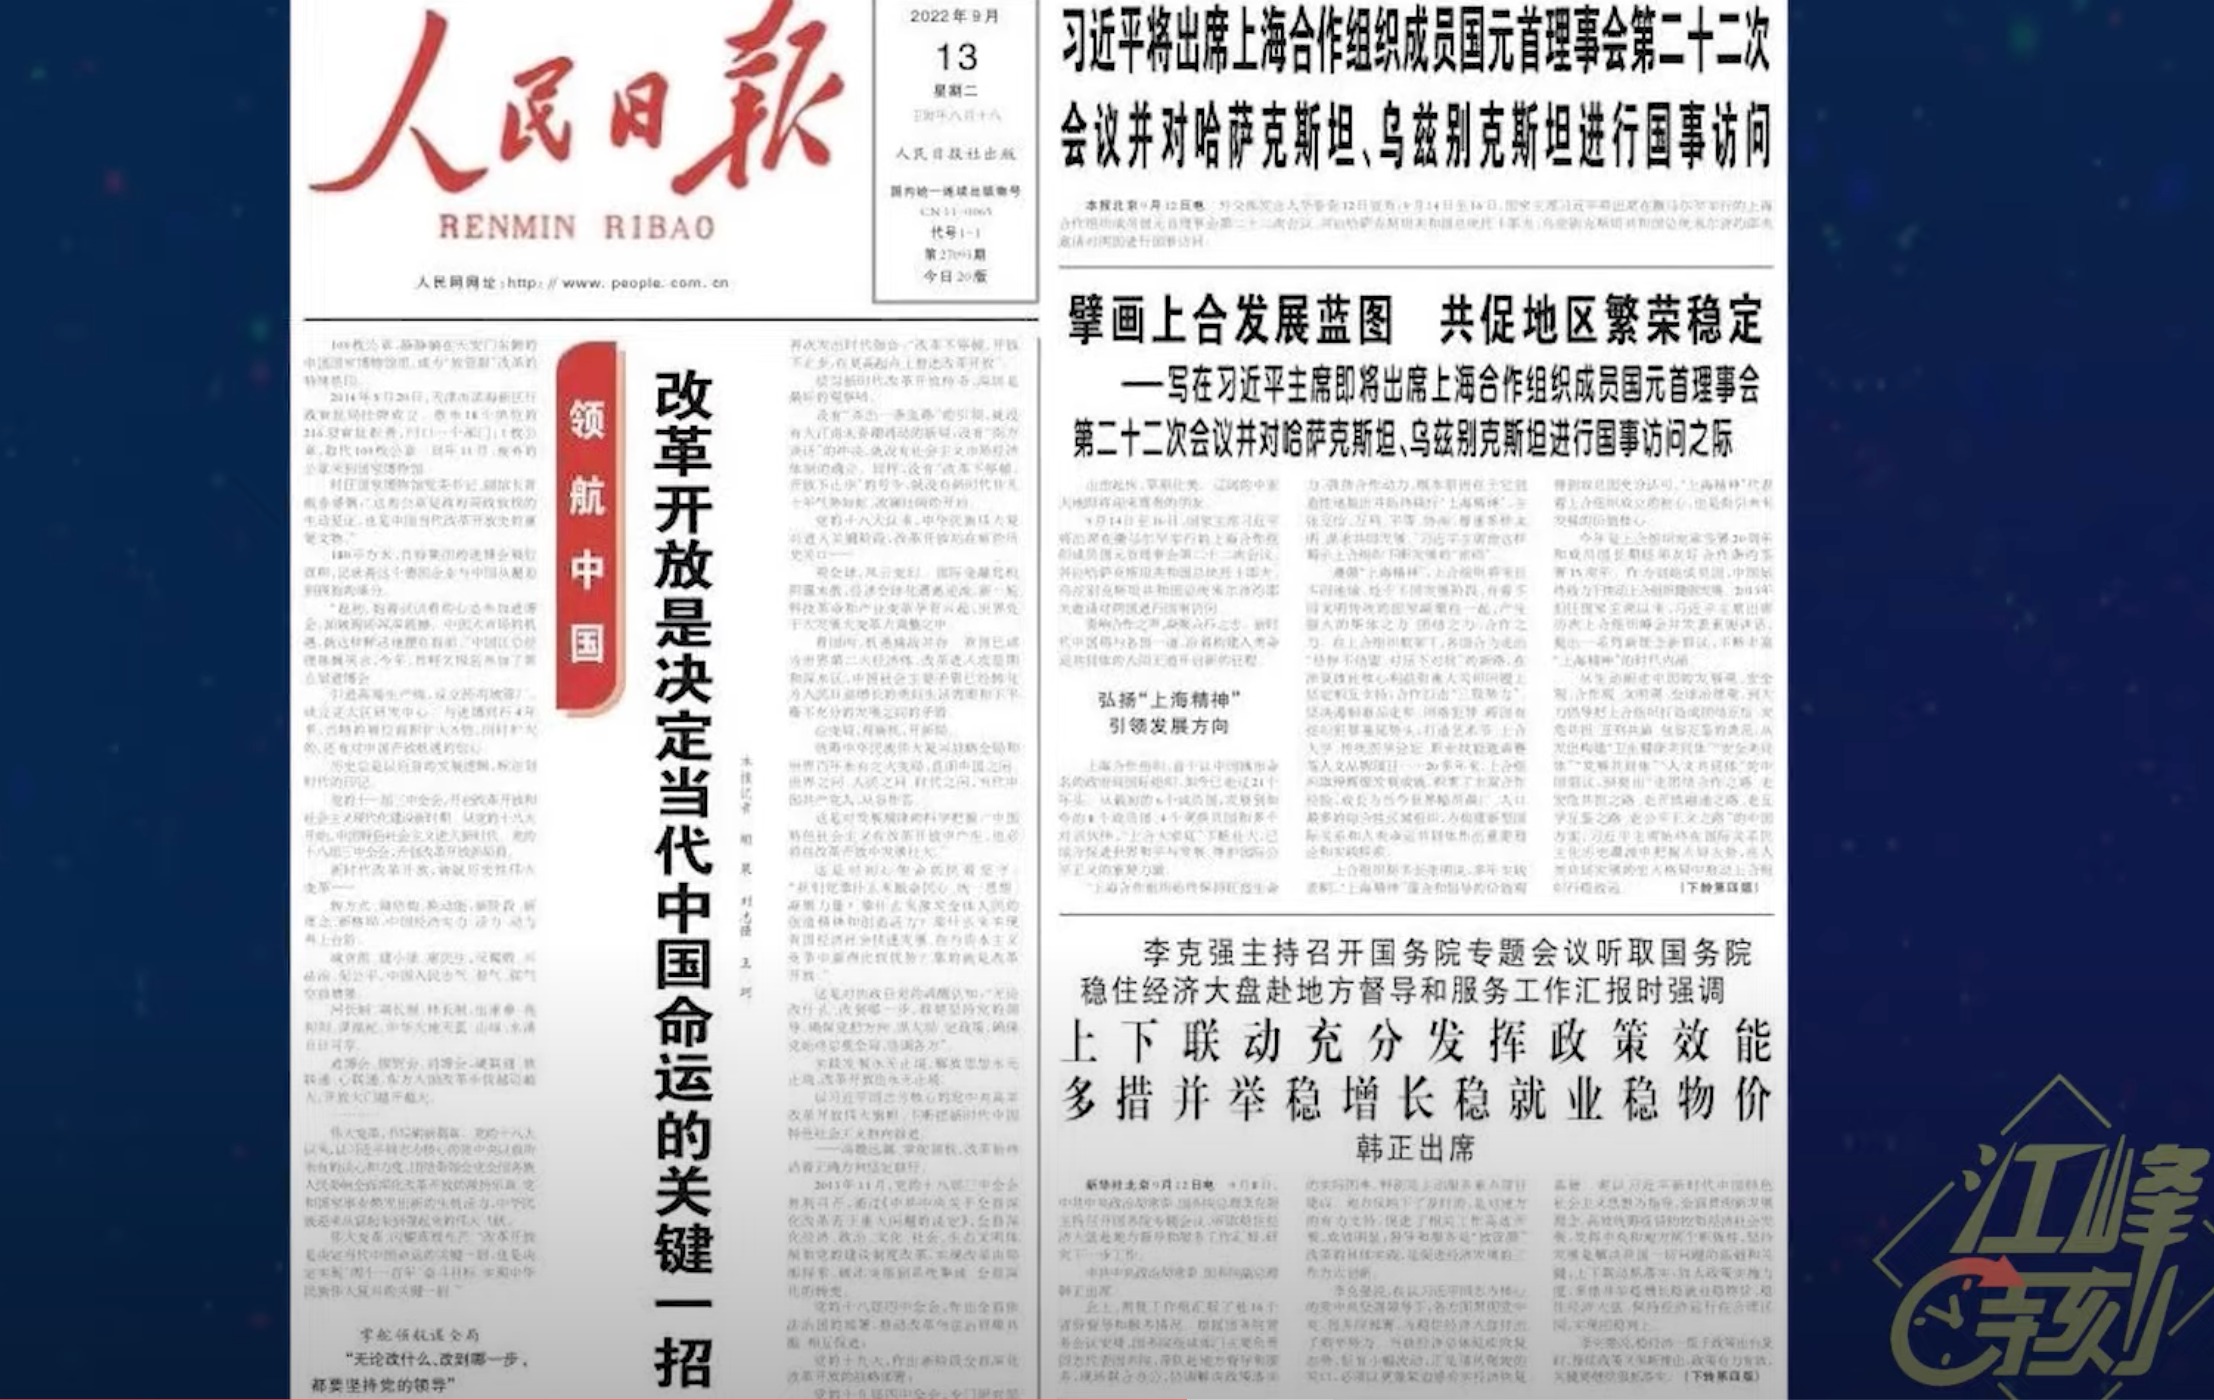 People's Day Articles